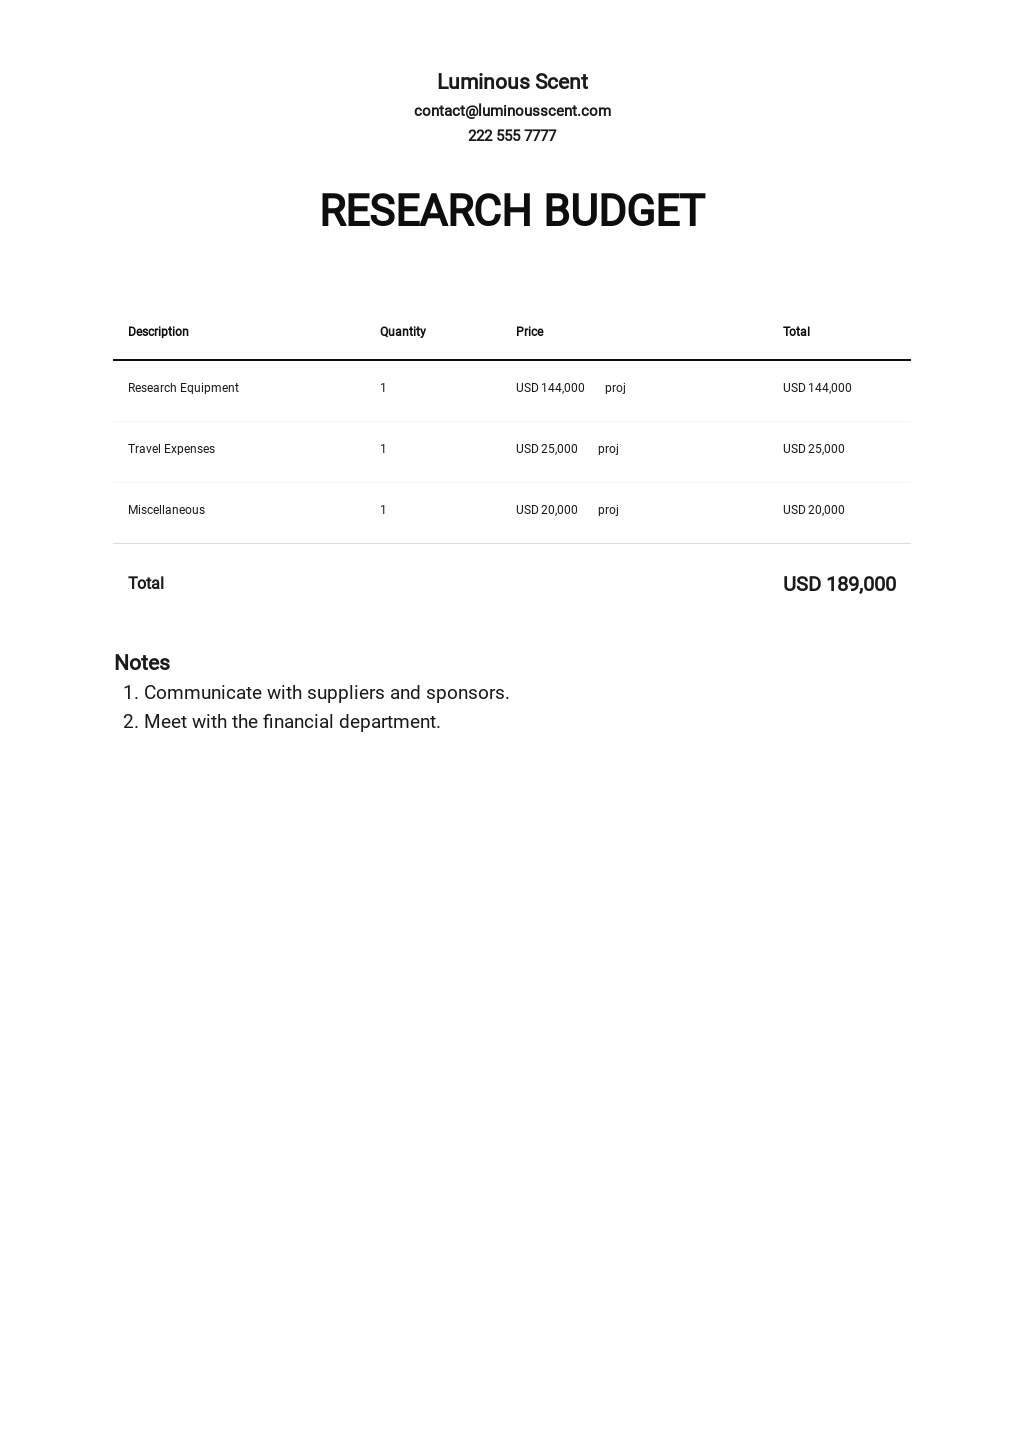 Research Budget Template [Free PDF] - Google Docs, Google Sheets, Excel